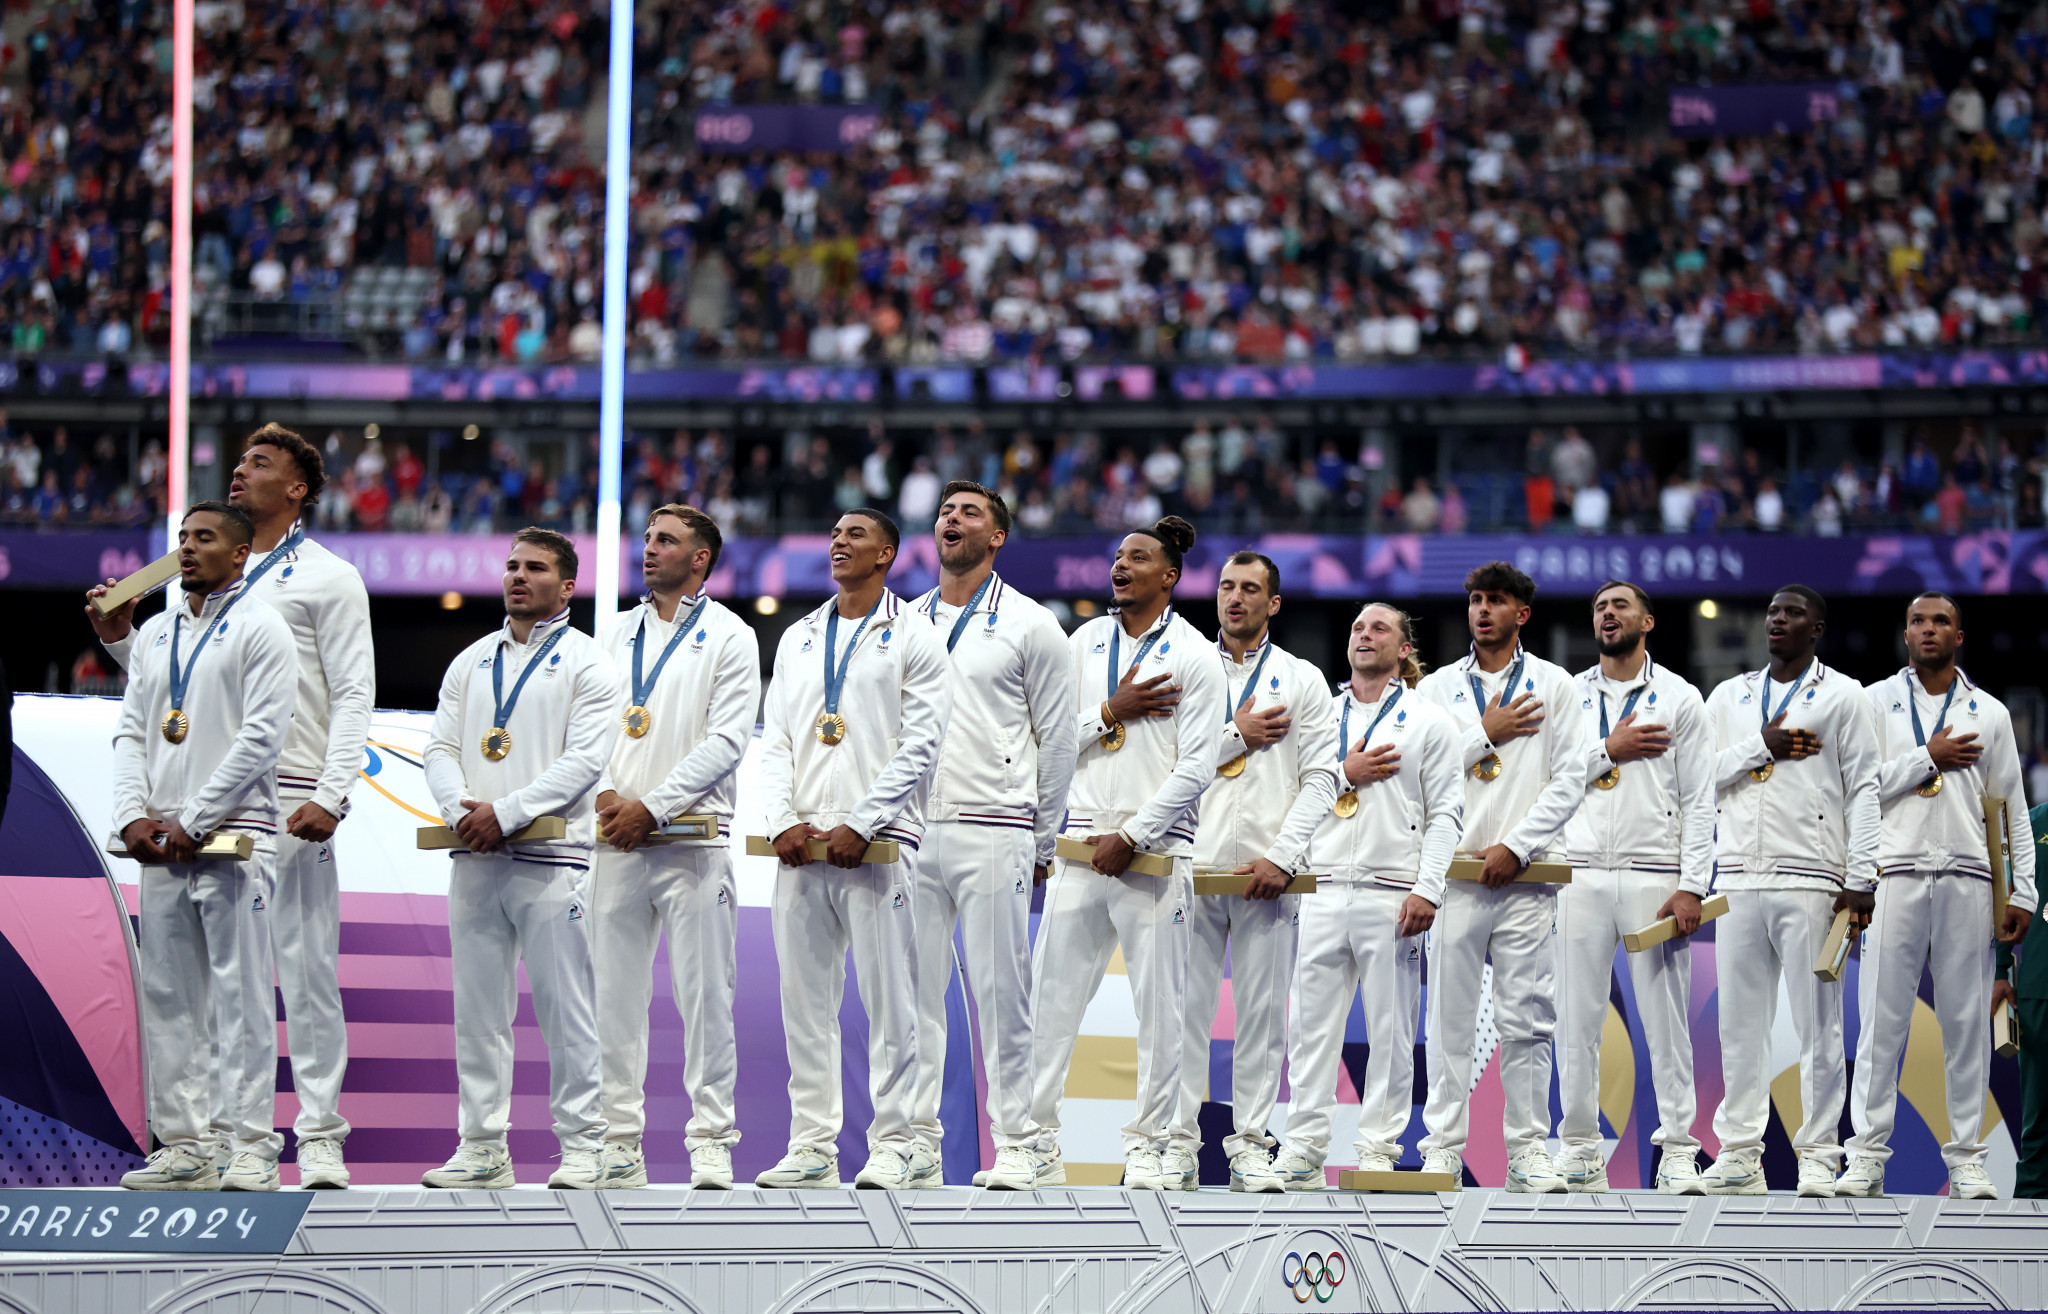 Gold medalists of Team France on the podium during the Men’s Rugby Sevens medal ceremony at the Olympic Games Paris 2024. GETTY IMAGES.